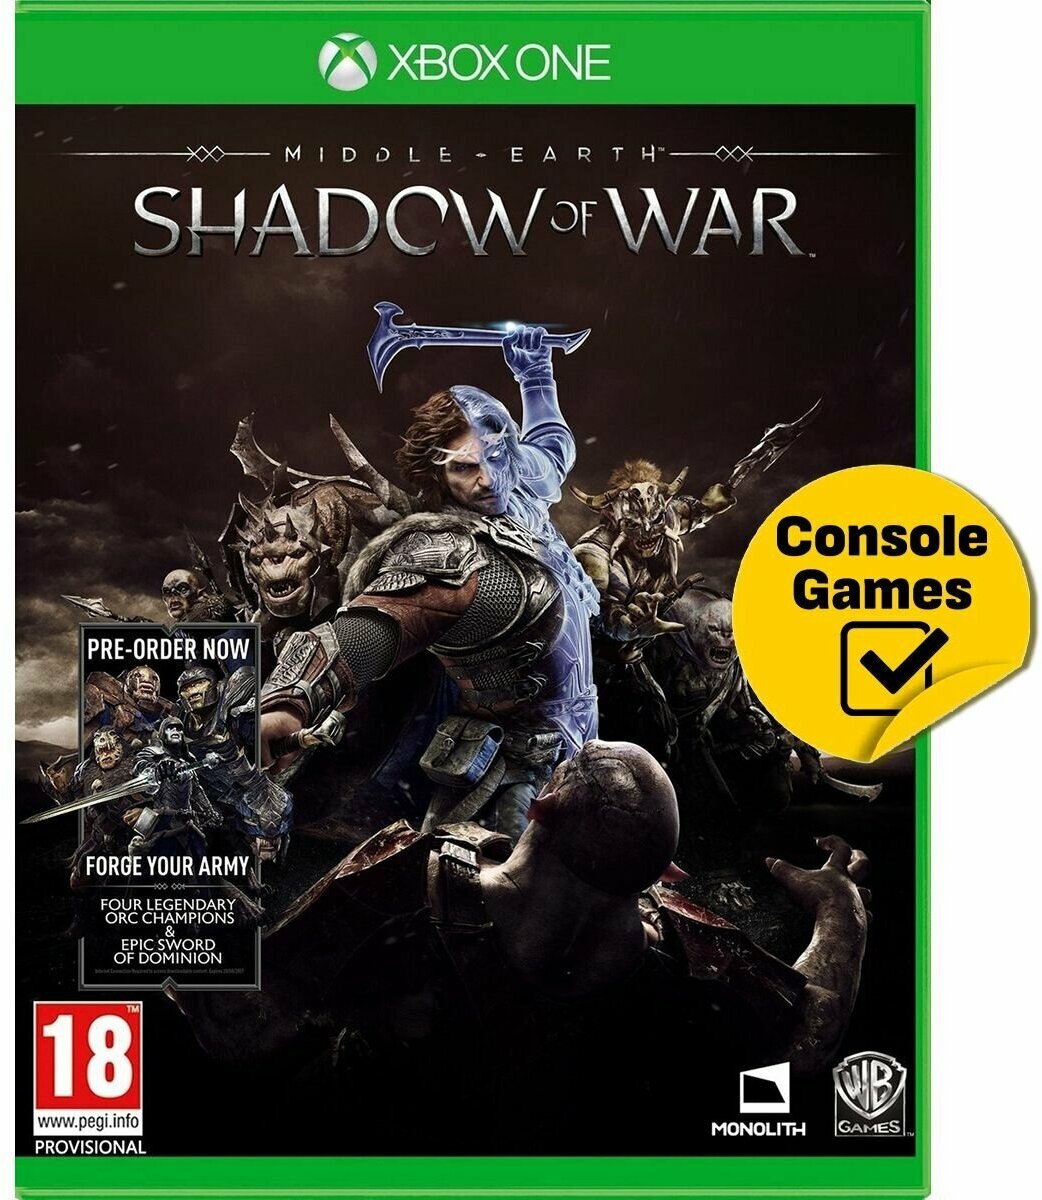 XBOX ONE Middle-Earth: Shadow of War (Средиземье Тени Войны)